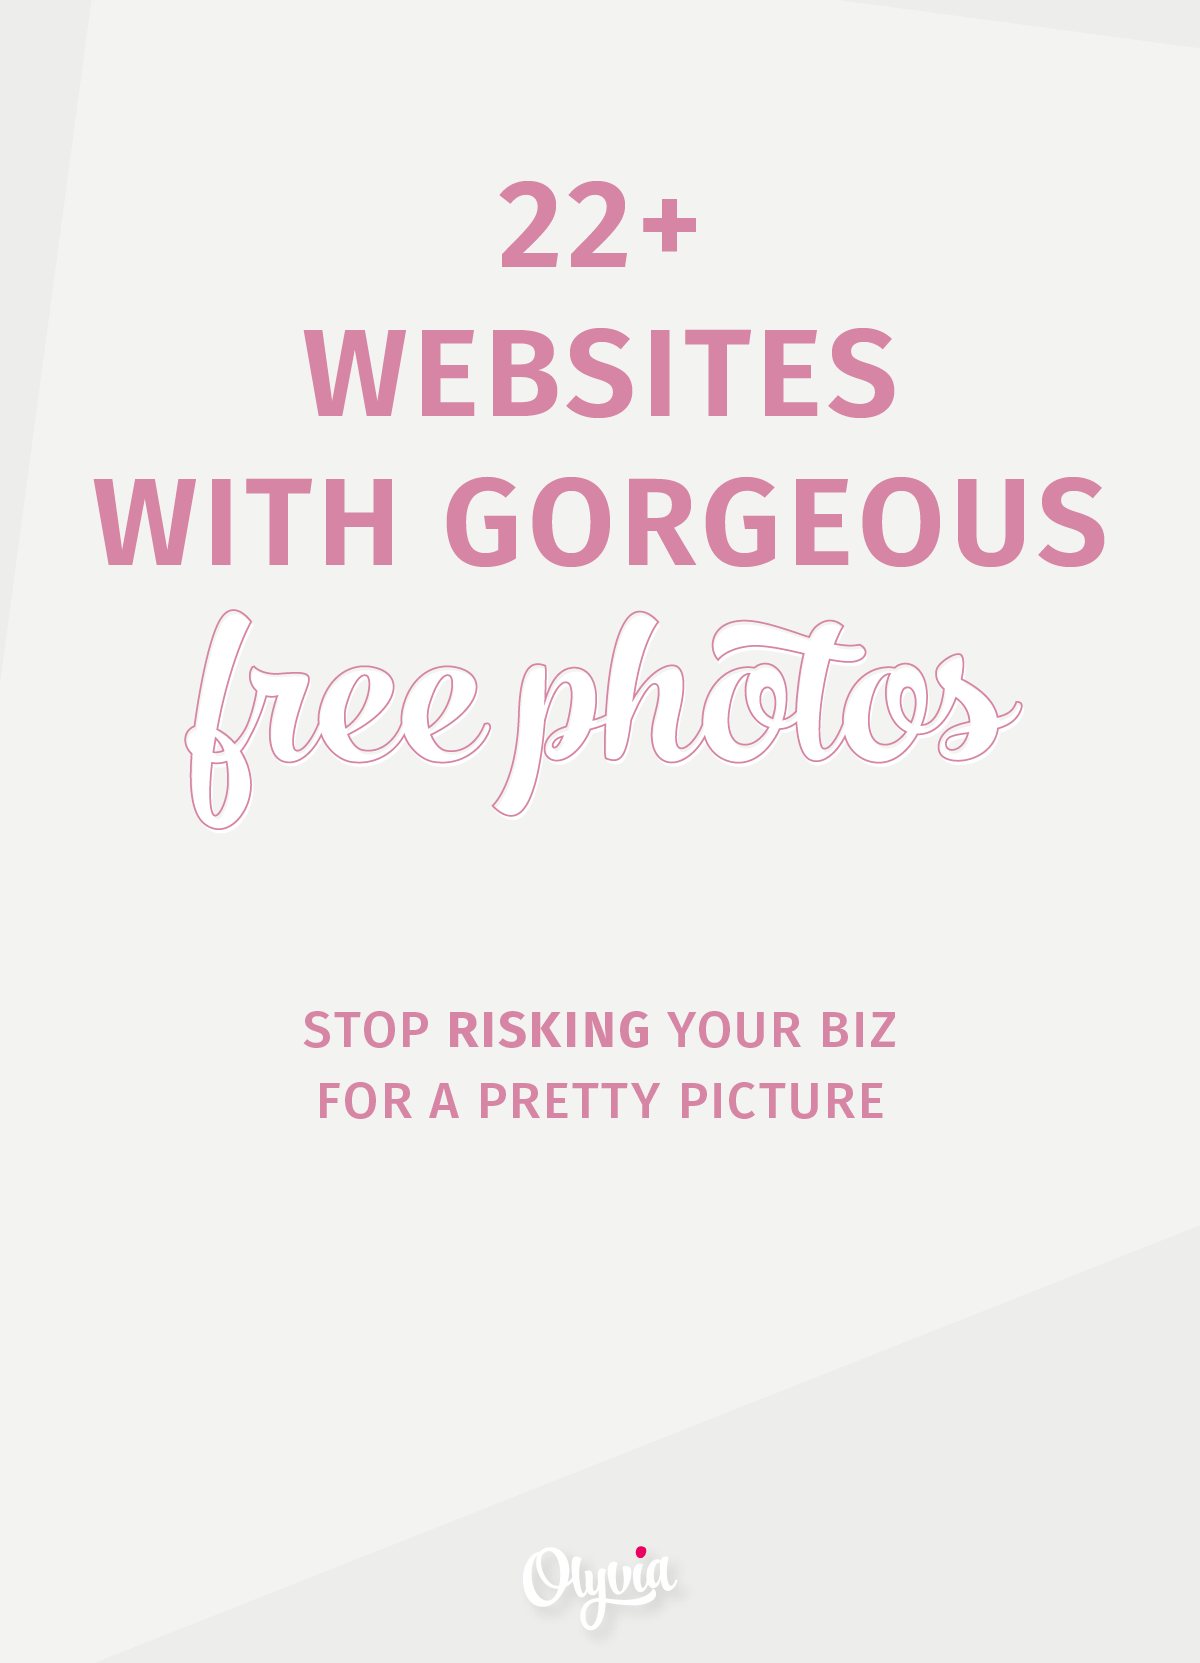 22+ of the best free stock photo websites for your blog and business. (Regularly updated!)